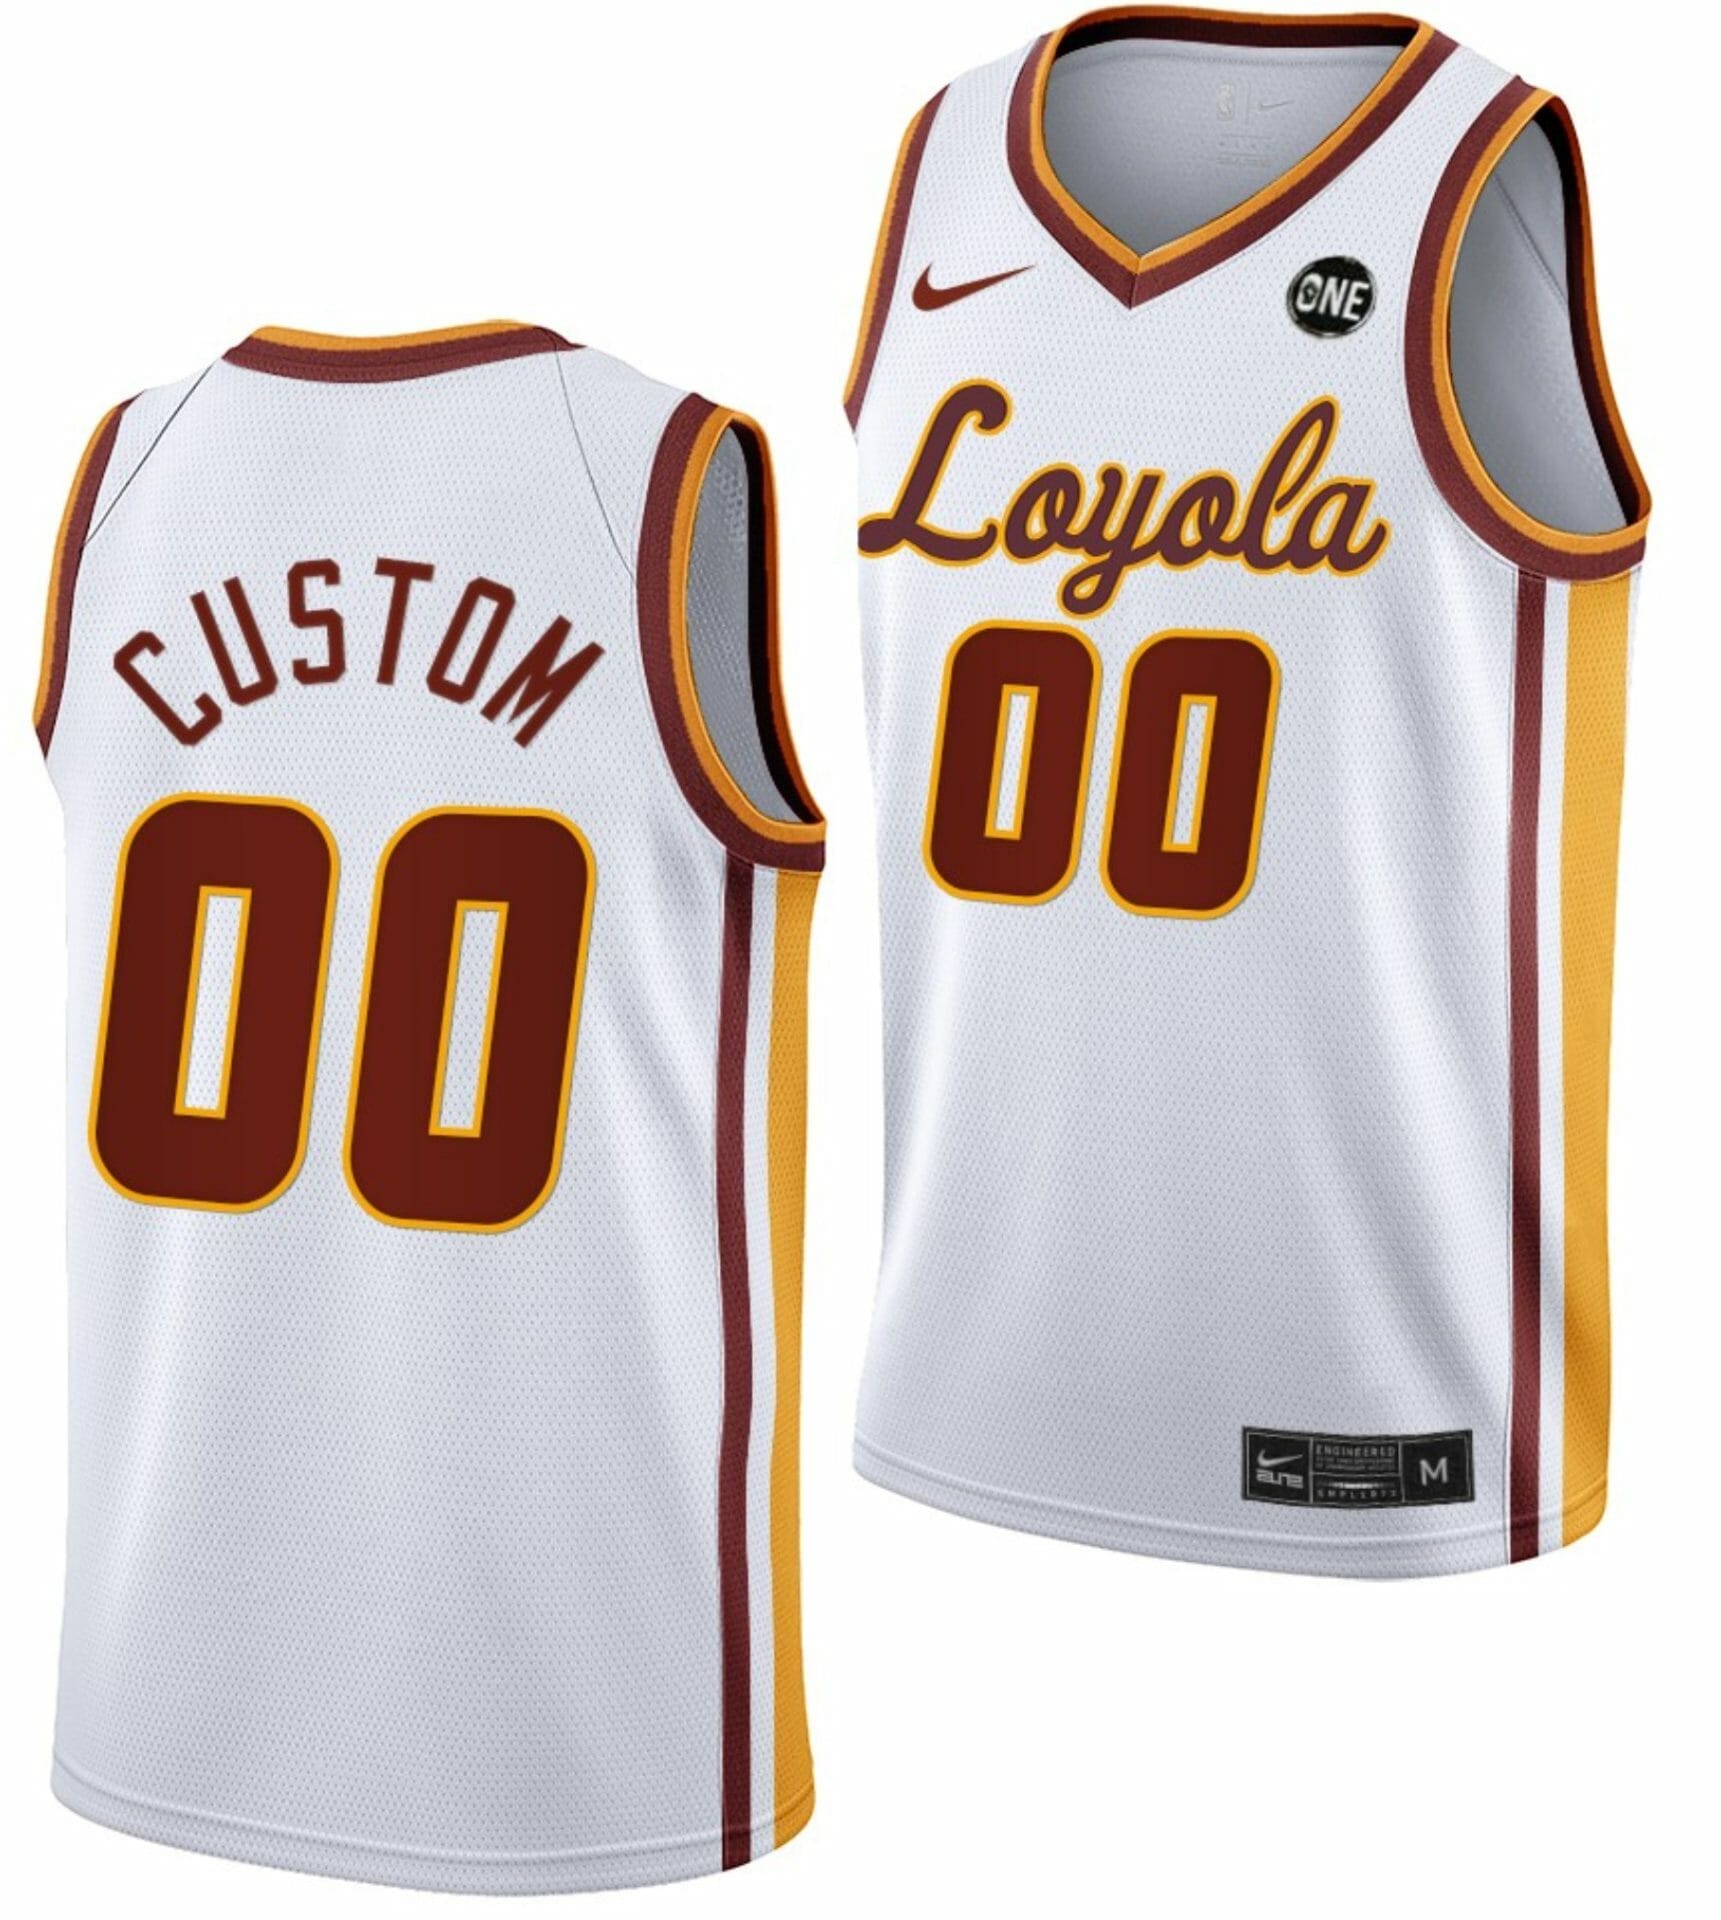 Ramblers jersey numbers